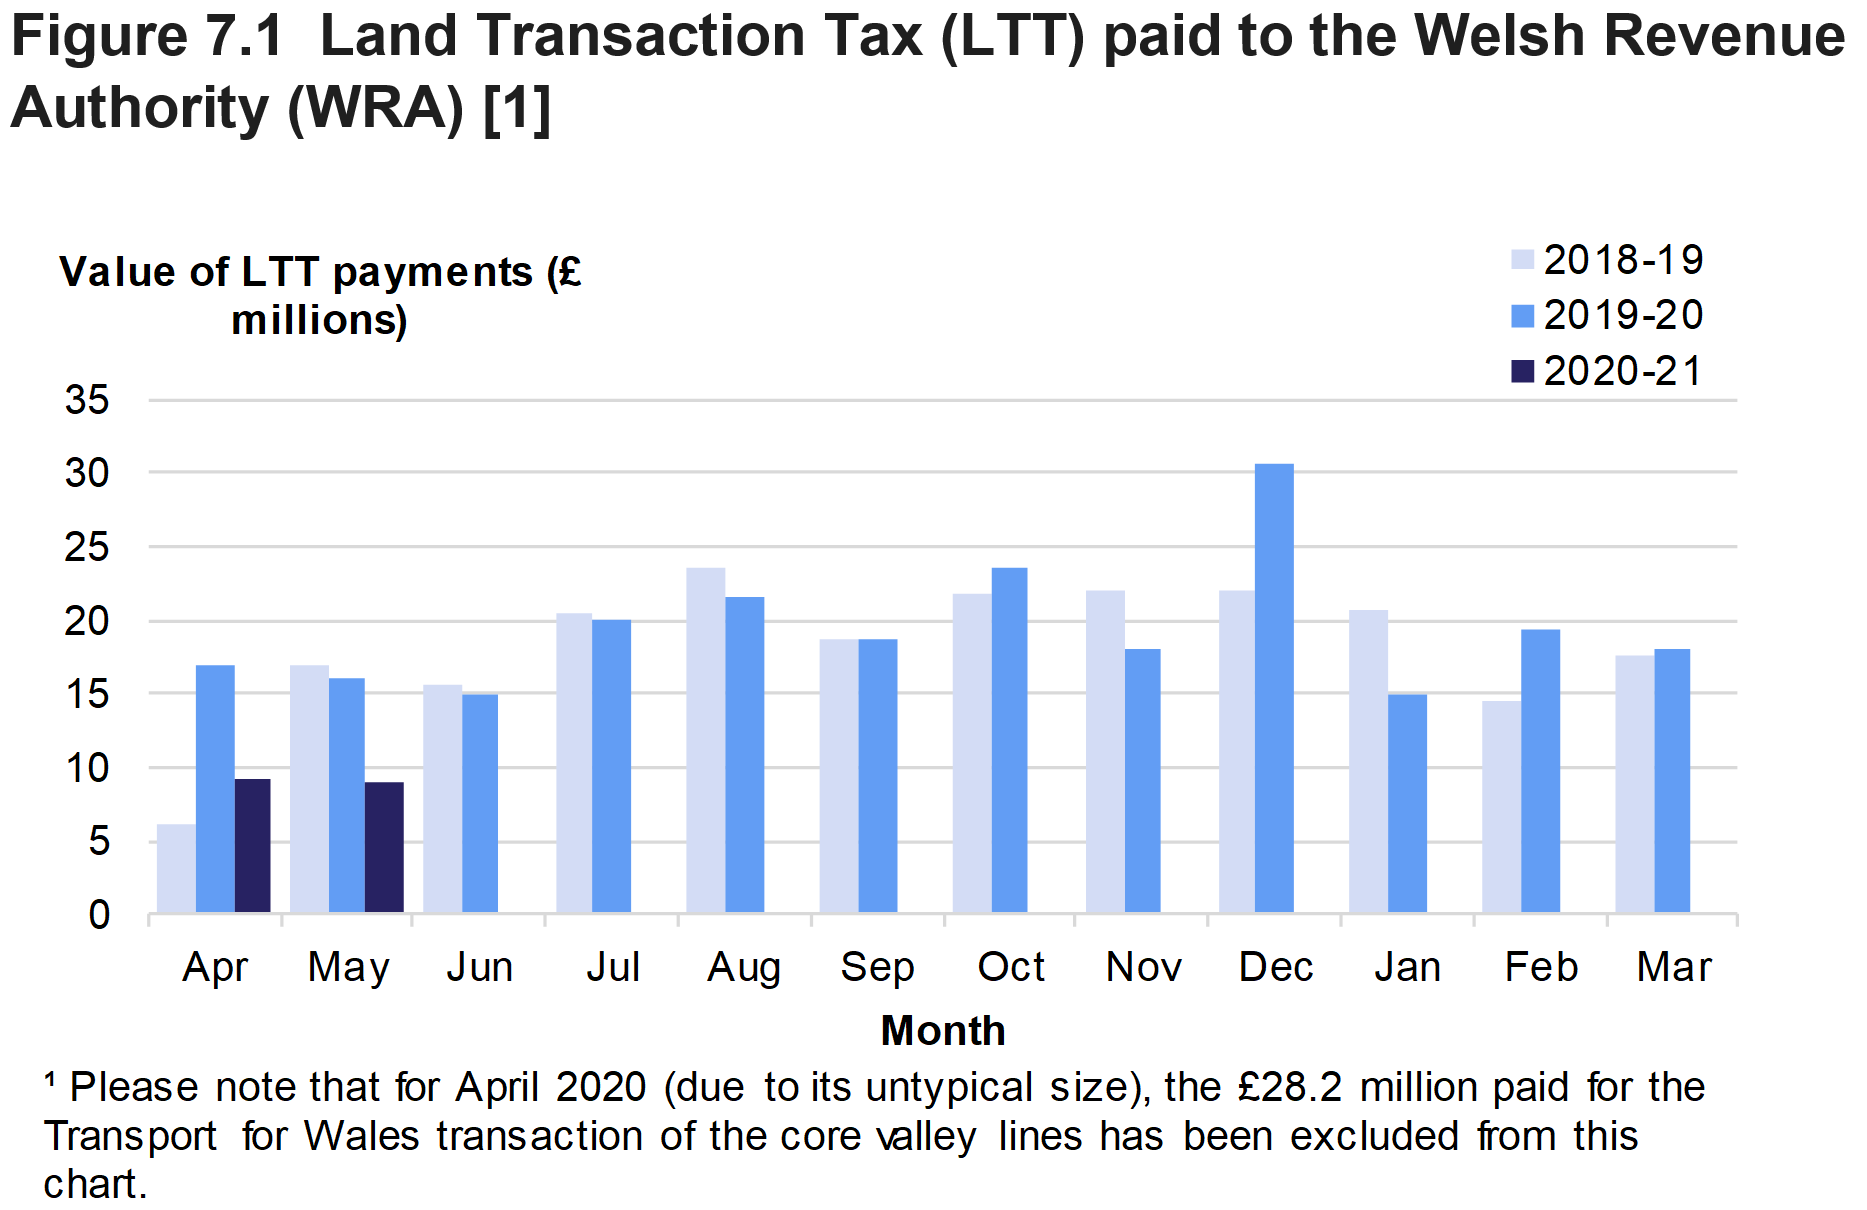 Figure 7.1 shows the monthly amounts of Land Transaction Tax paid to the Welsh Revenue Authority, for April 2018 to May 2020.